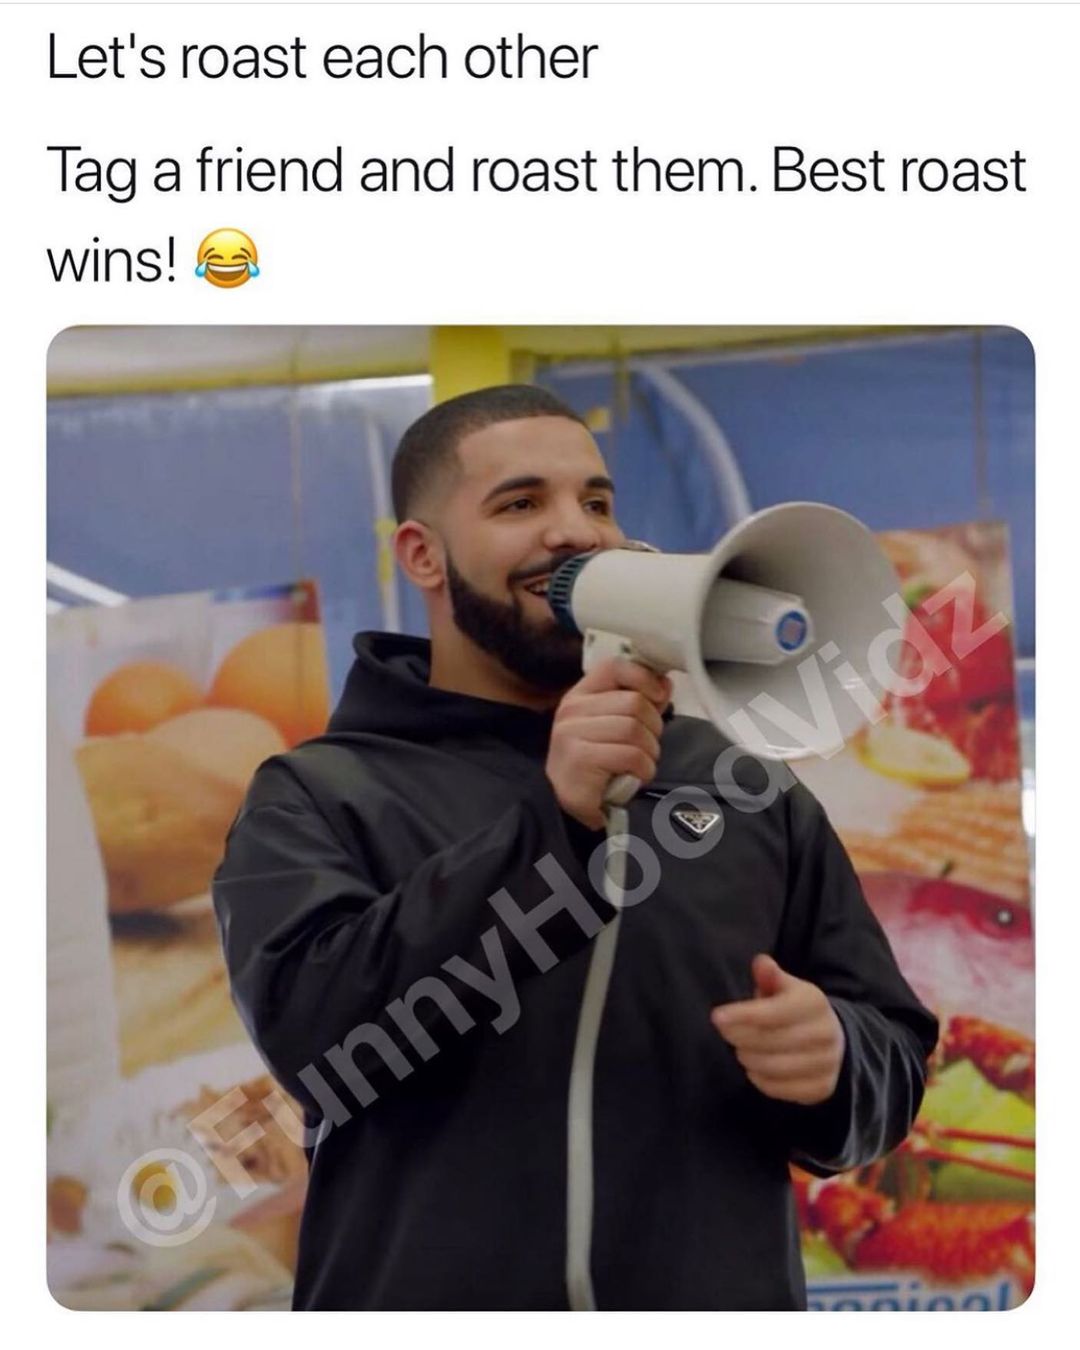 Let's roast each other.  Tag a friend and roast them. Best roast wins!